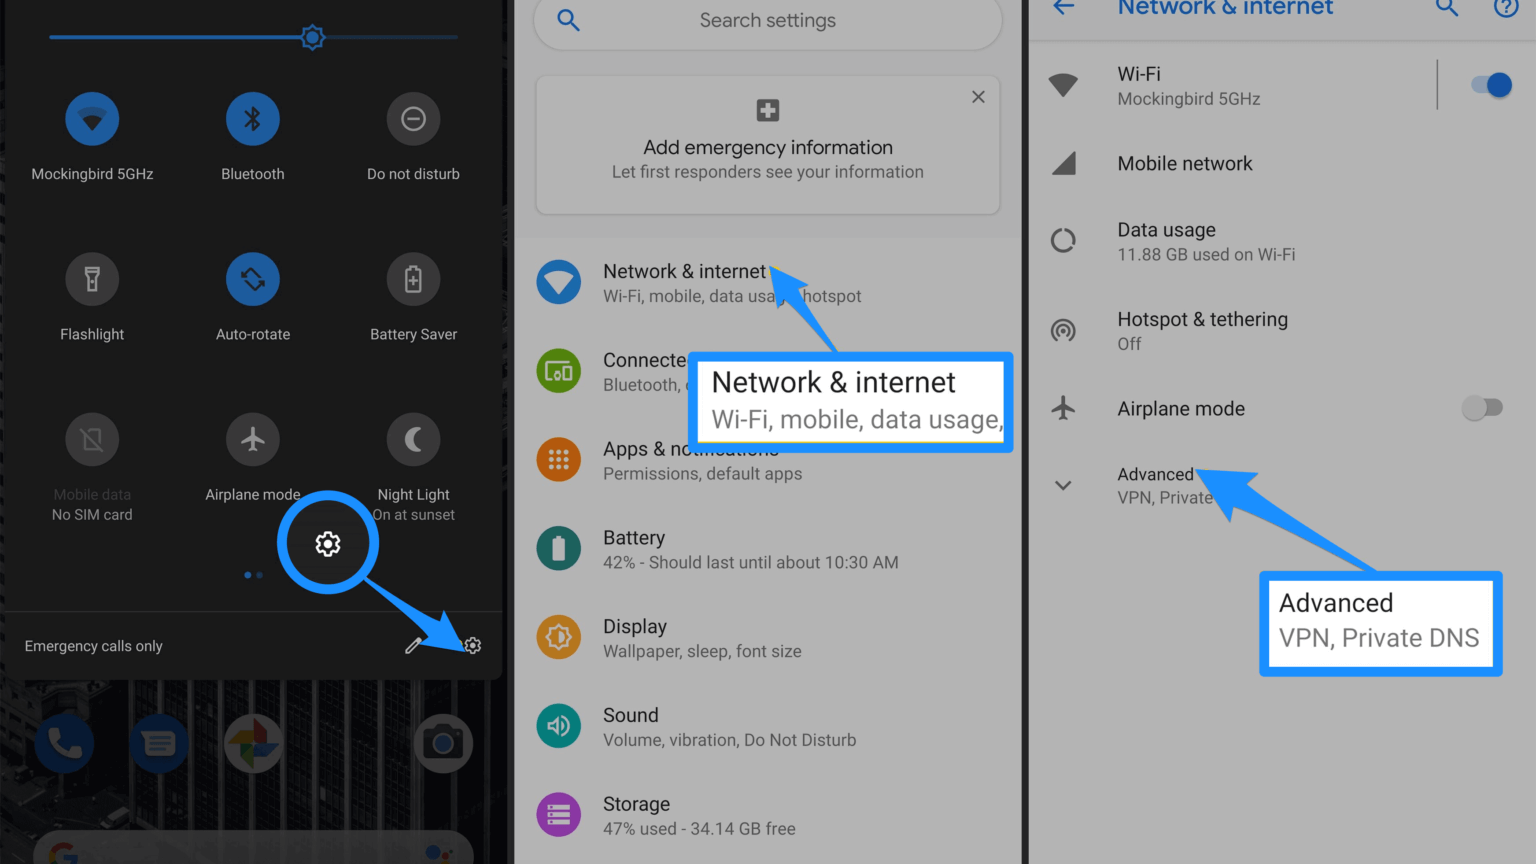 nox app player location settings not working